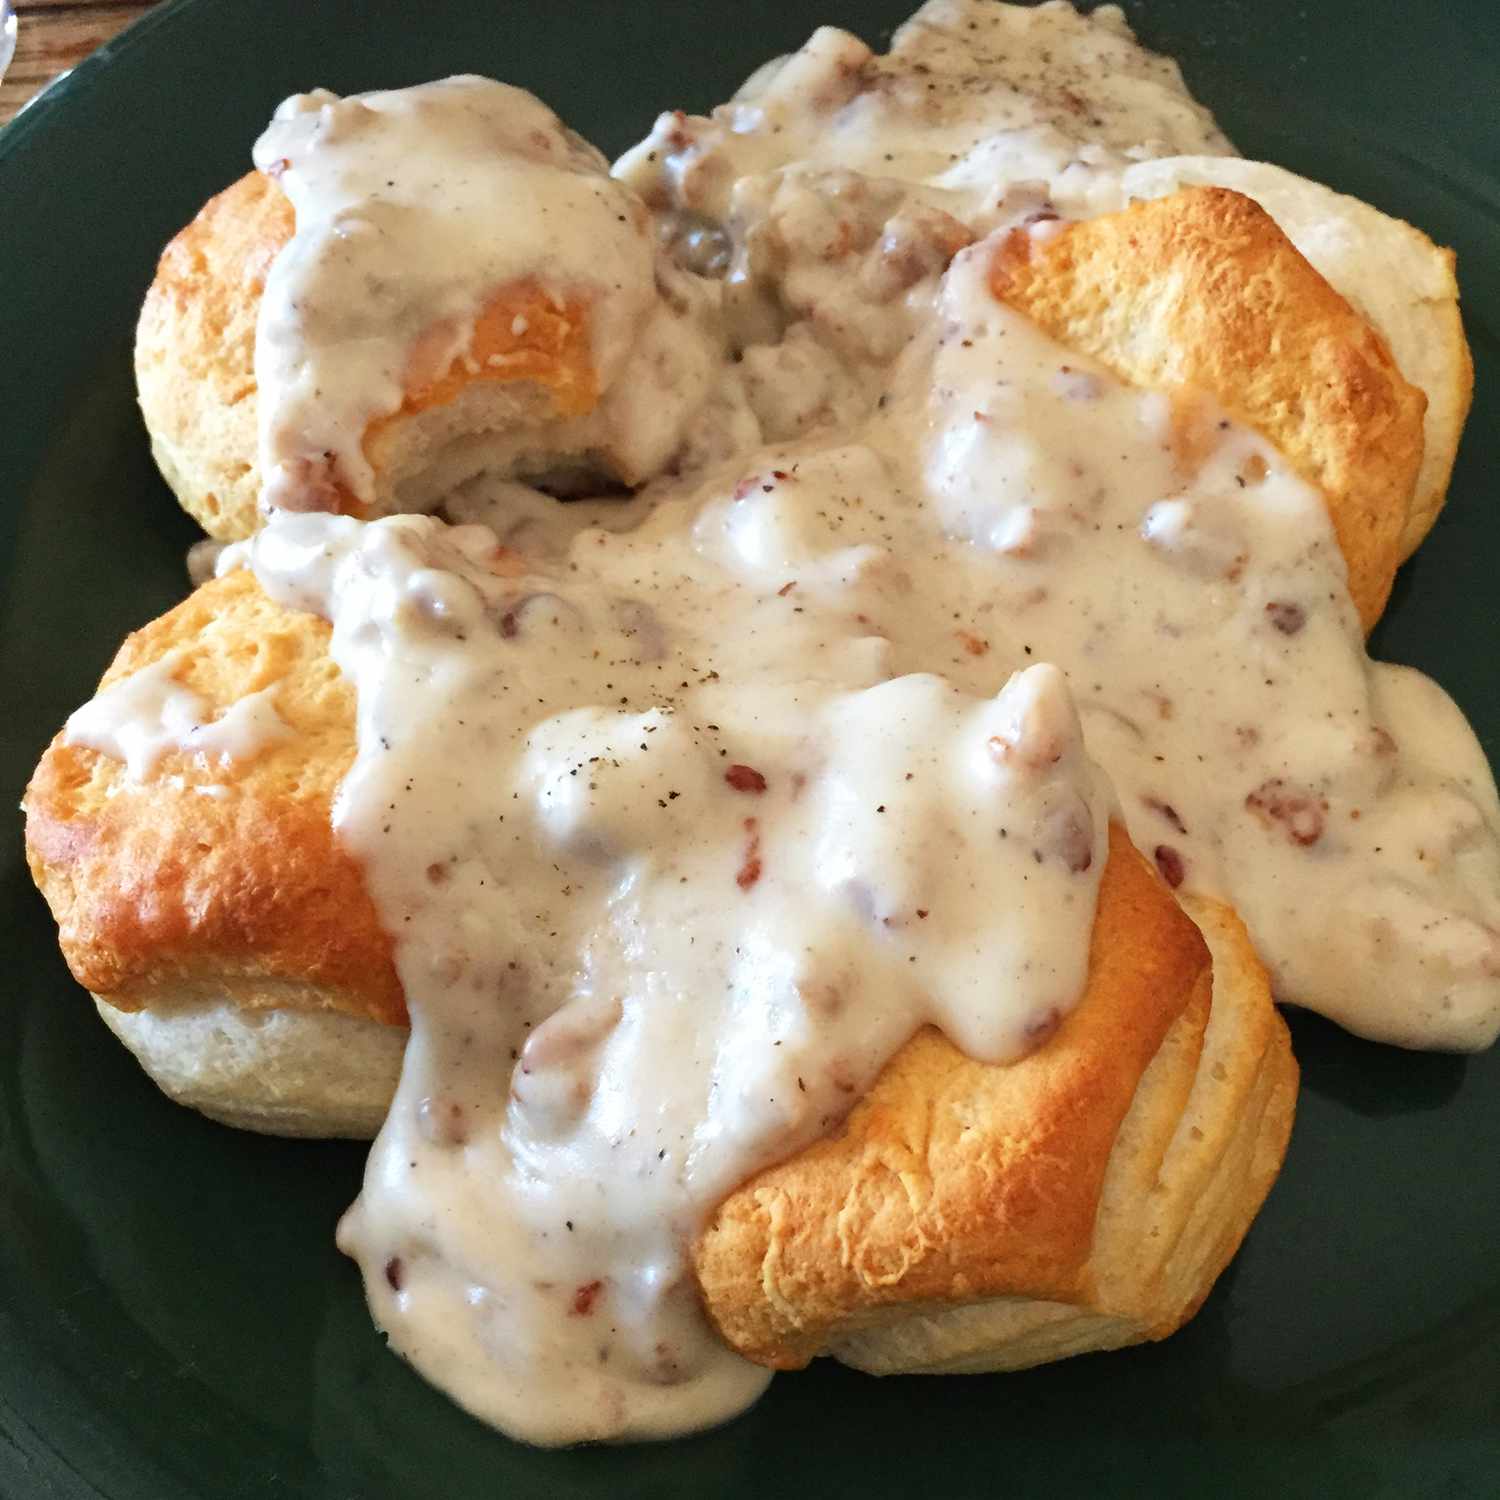 close up view of Bill's Sausage Gravy over biscuits on a green plate